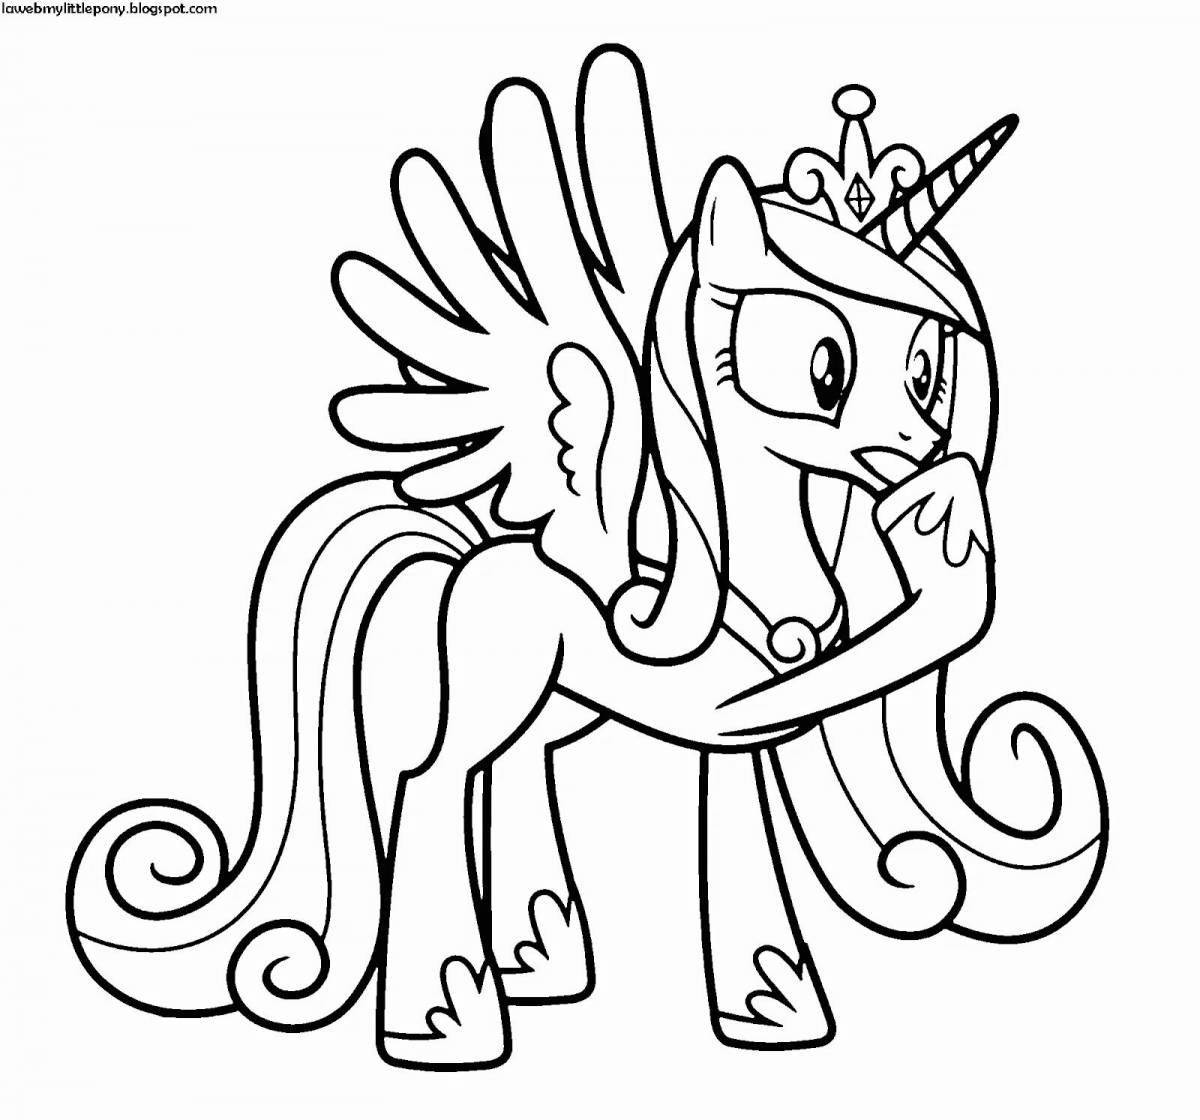 Jazzy cadence coloring book